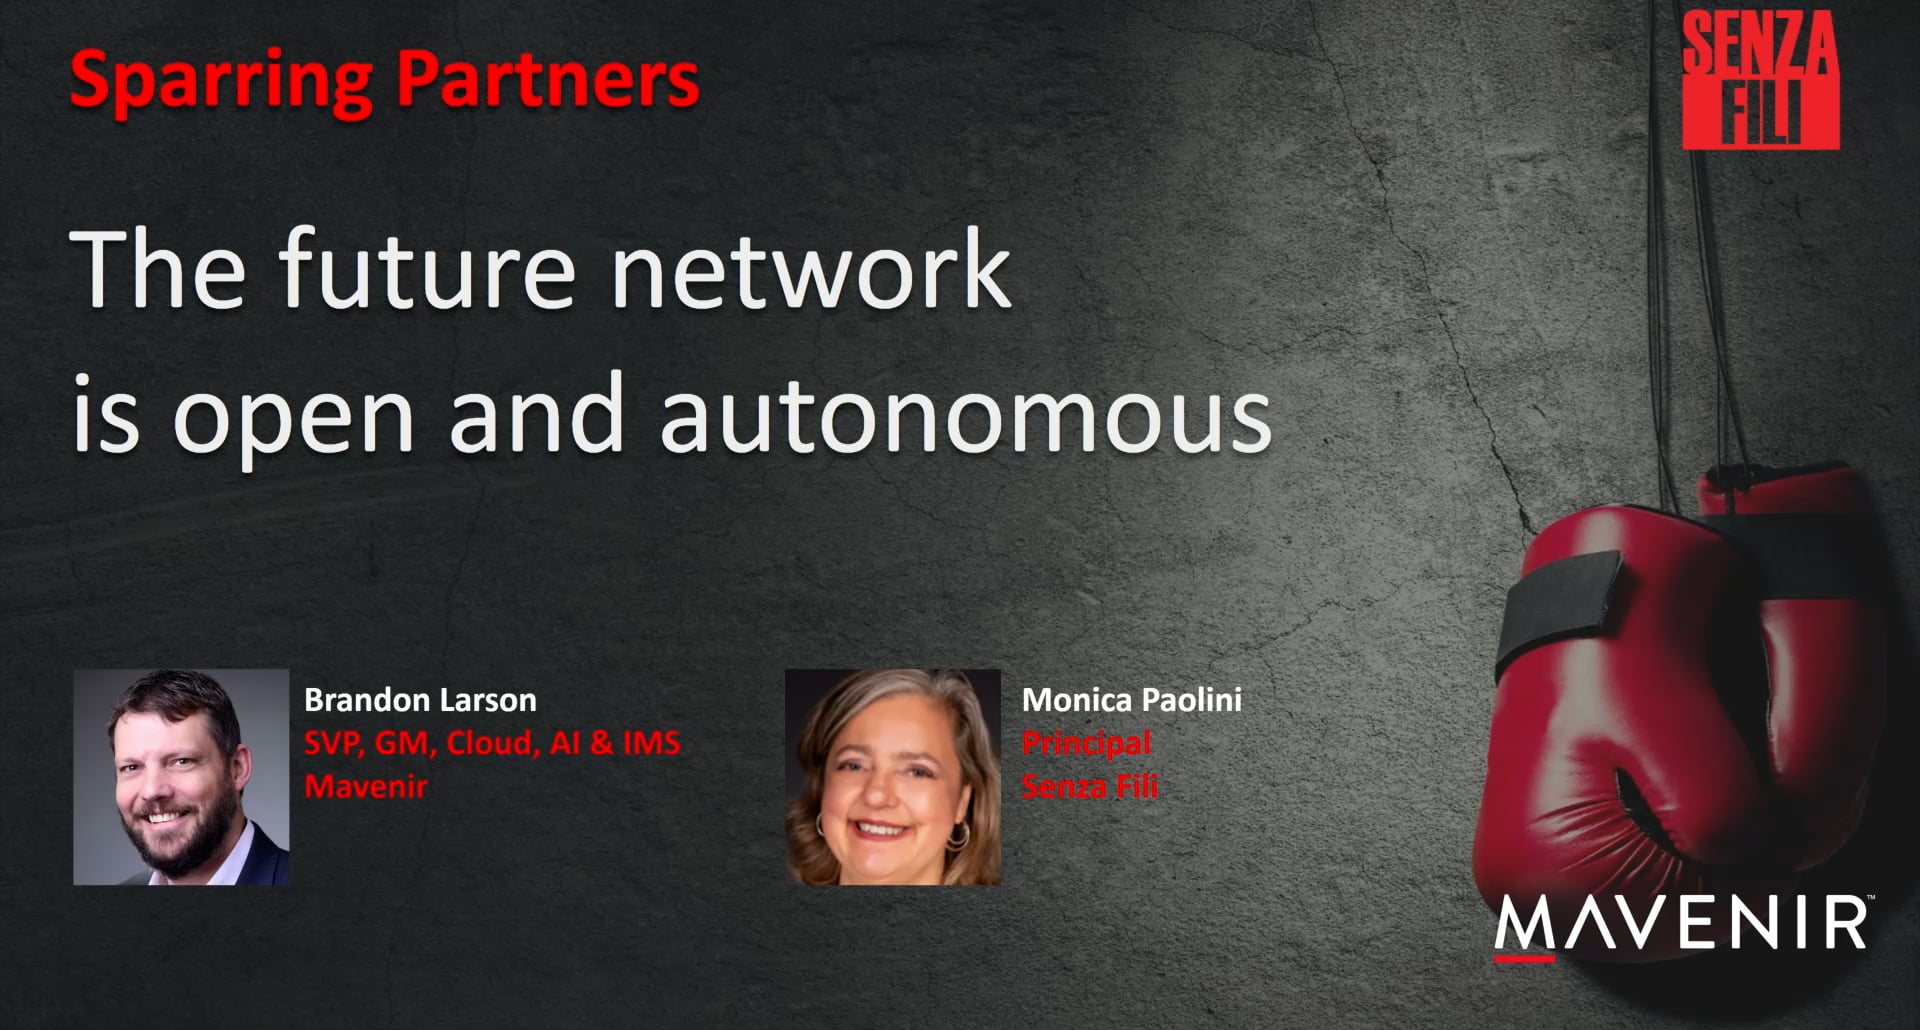 Sparring Partners | The Future Network Is Open and Autonomous